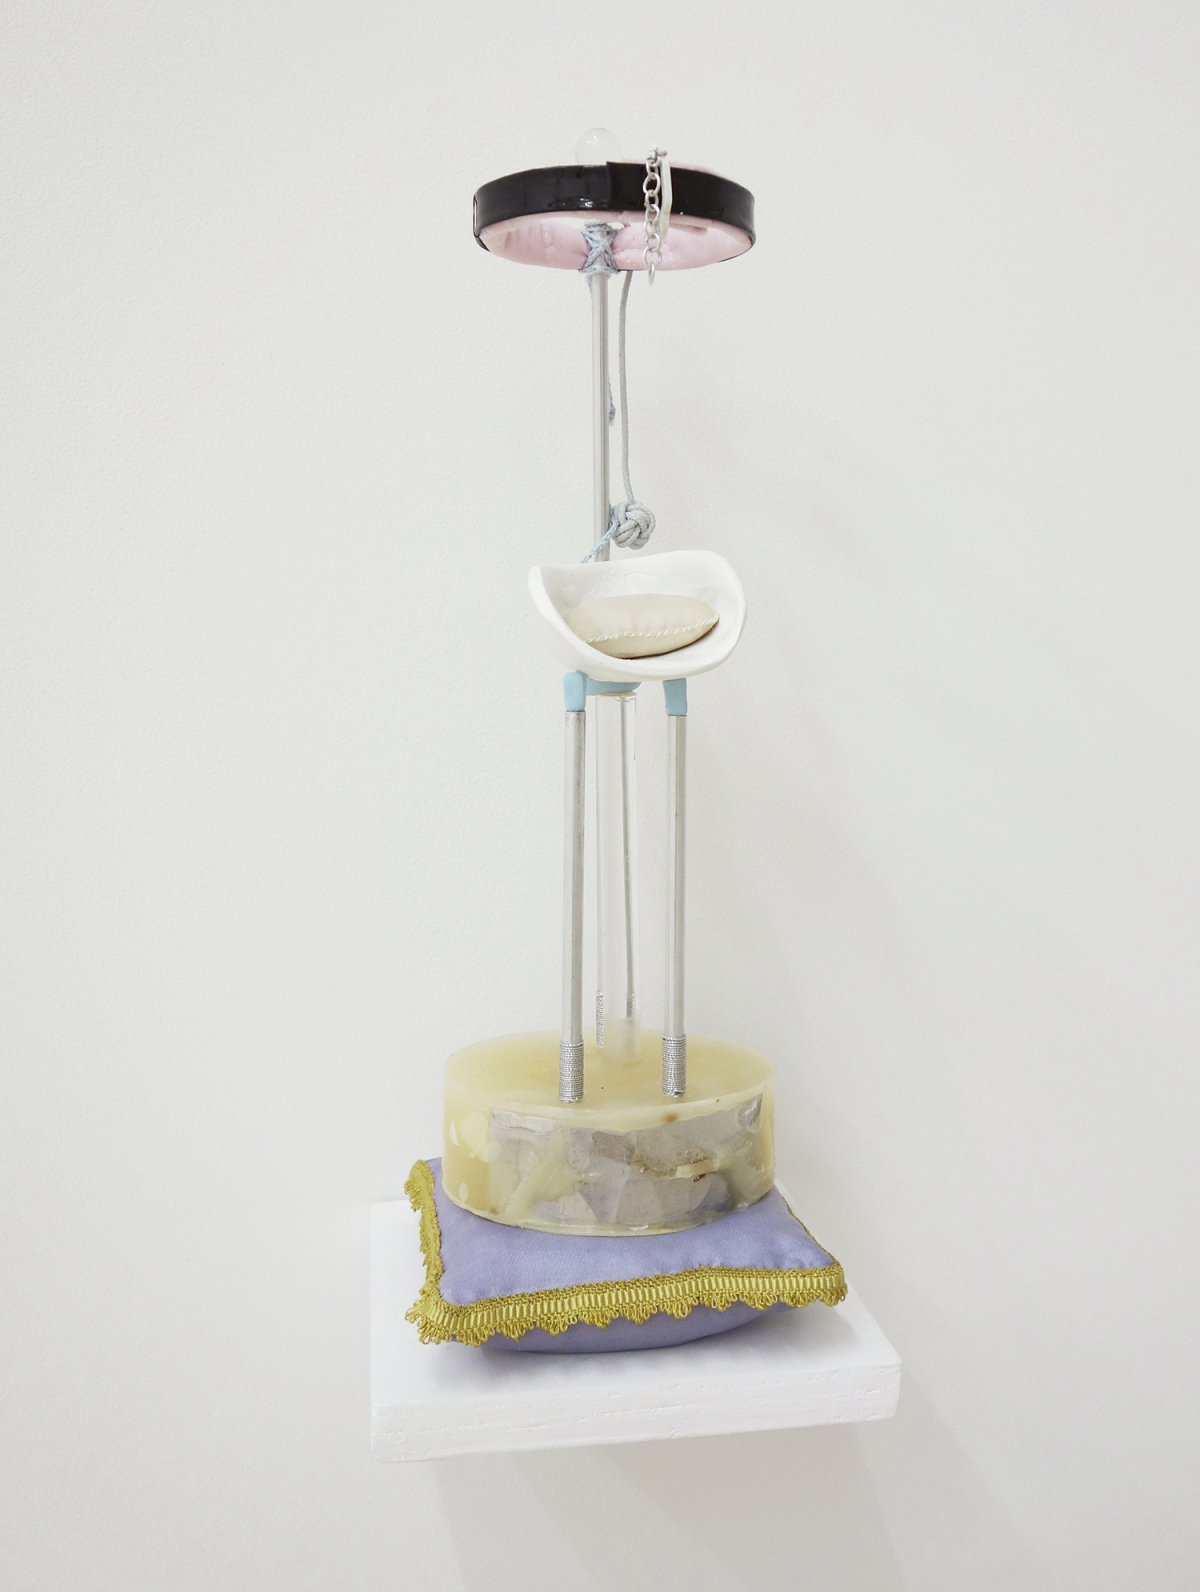 Small sculpture made of a small purple pillow with yellow trim and a small, tiered, tower-like contraption on top of it, the center features a hand made tiny white pillow cradled in something rounded and the top has a black collar type object lined with pink satin.